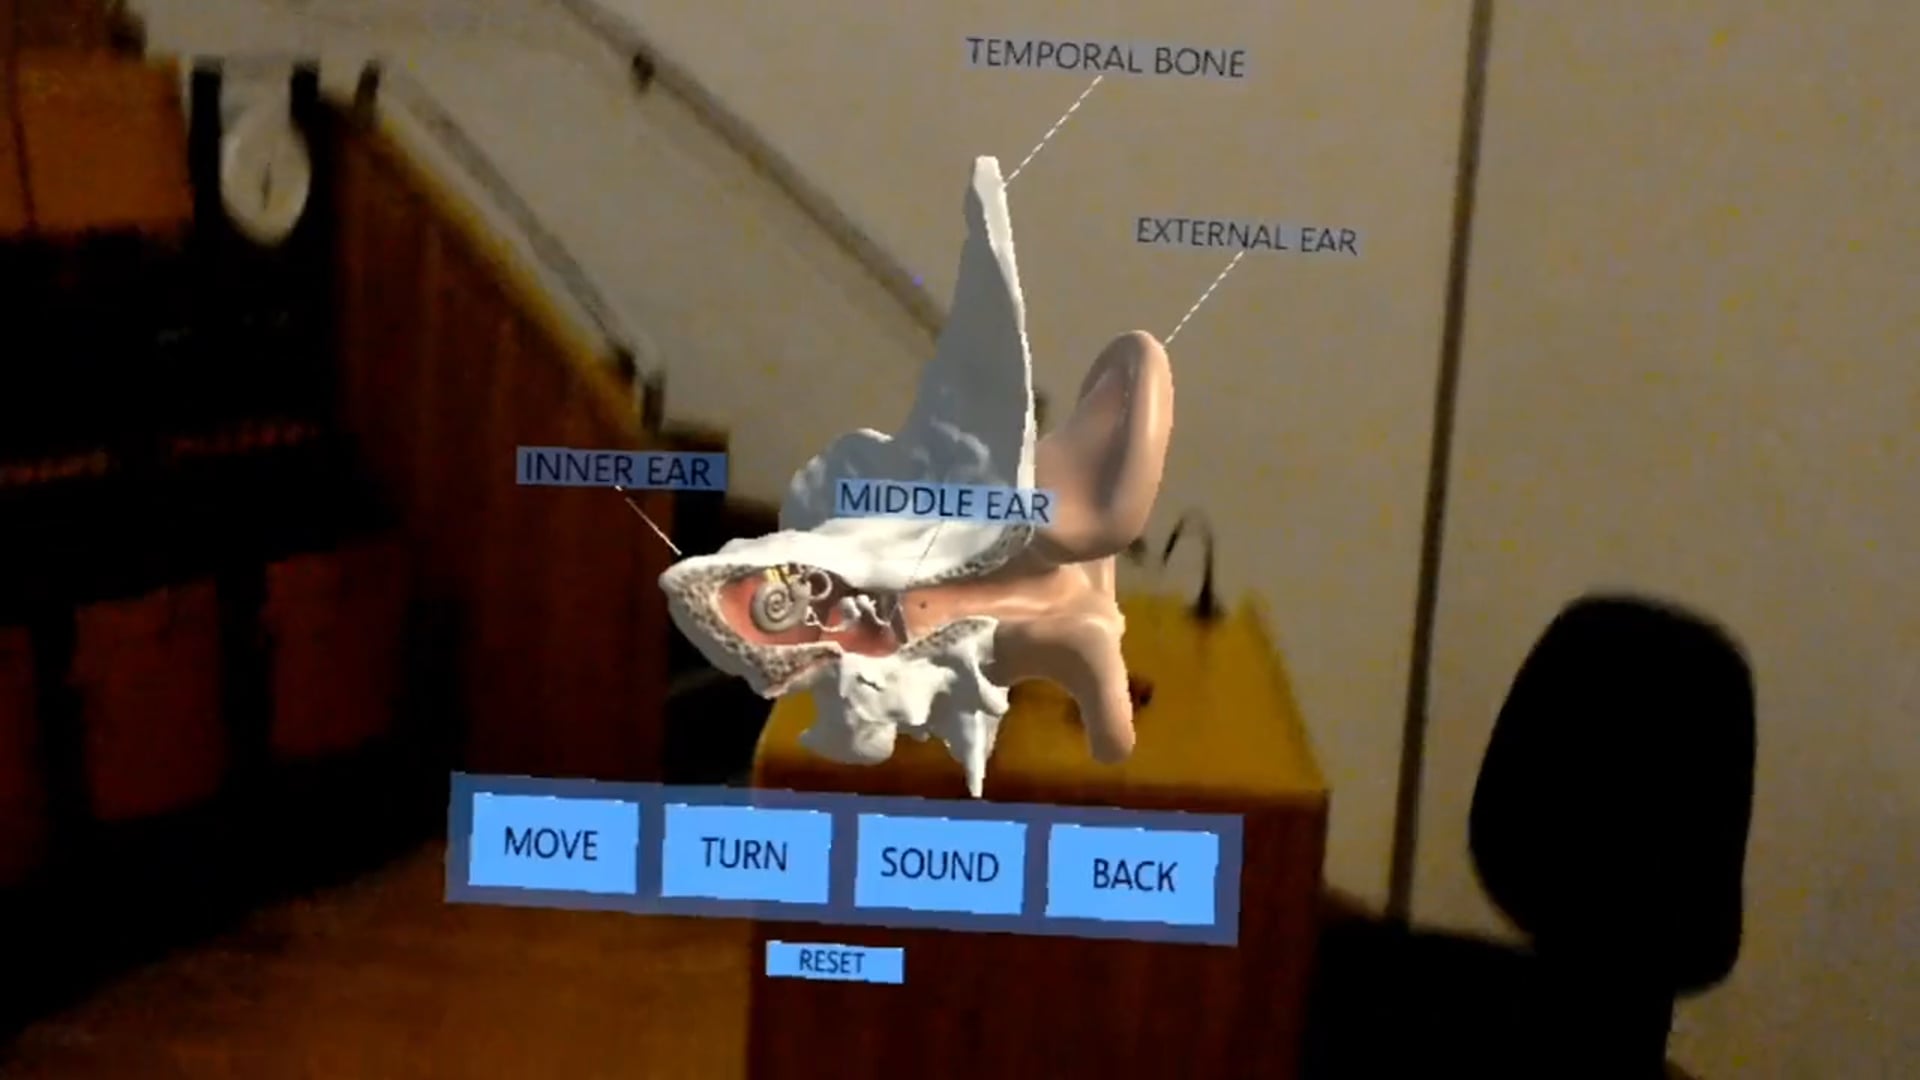 Temporal Bone Anatomy - Augmented Reality Demonstration